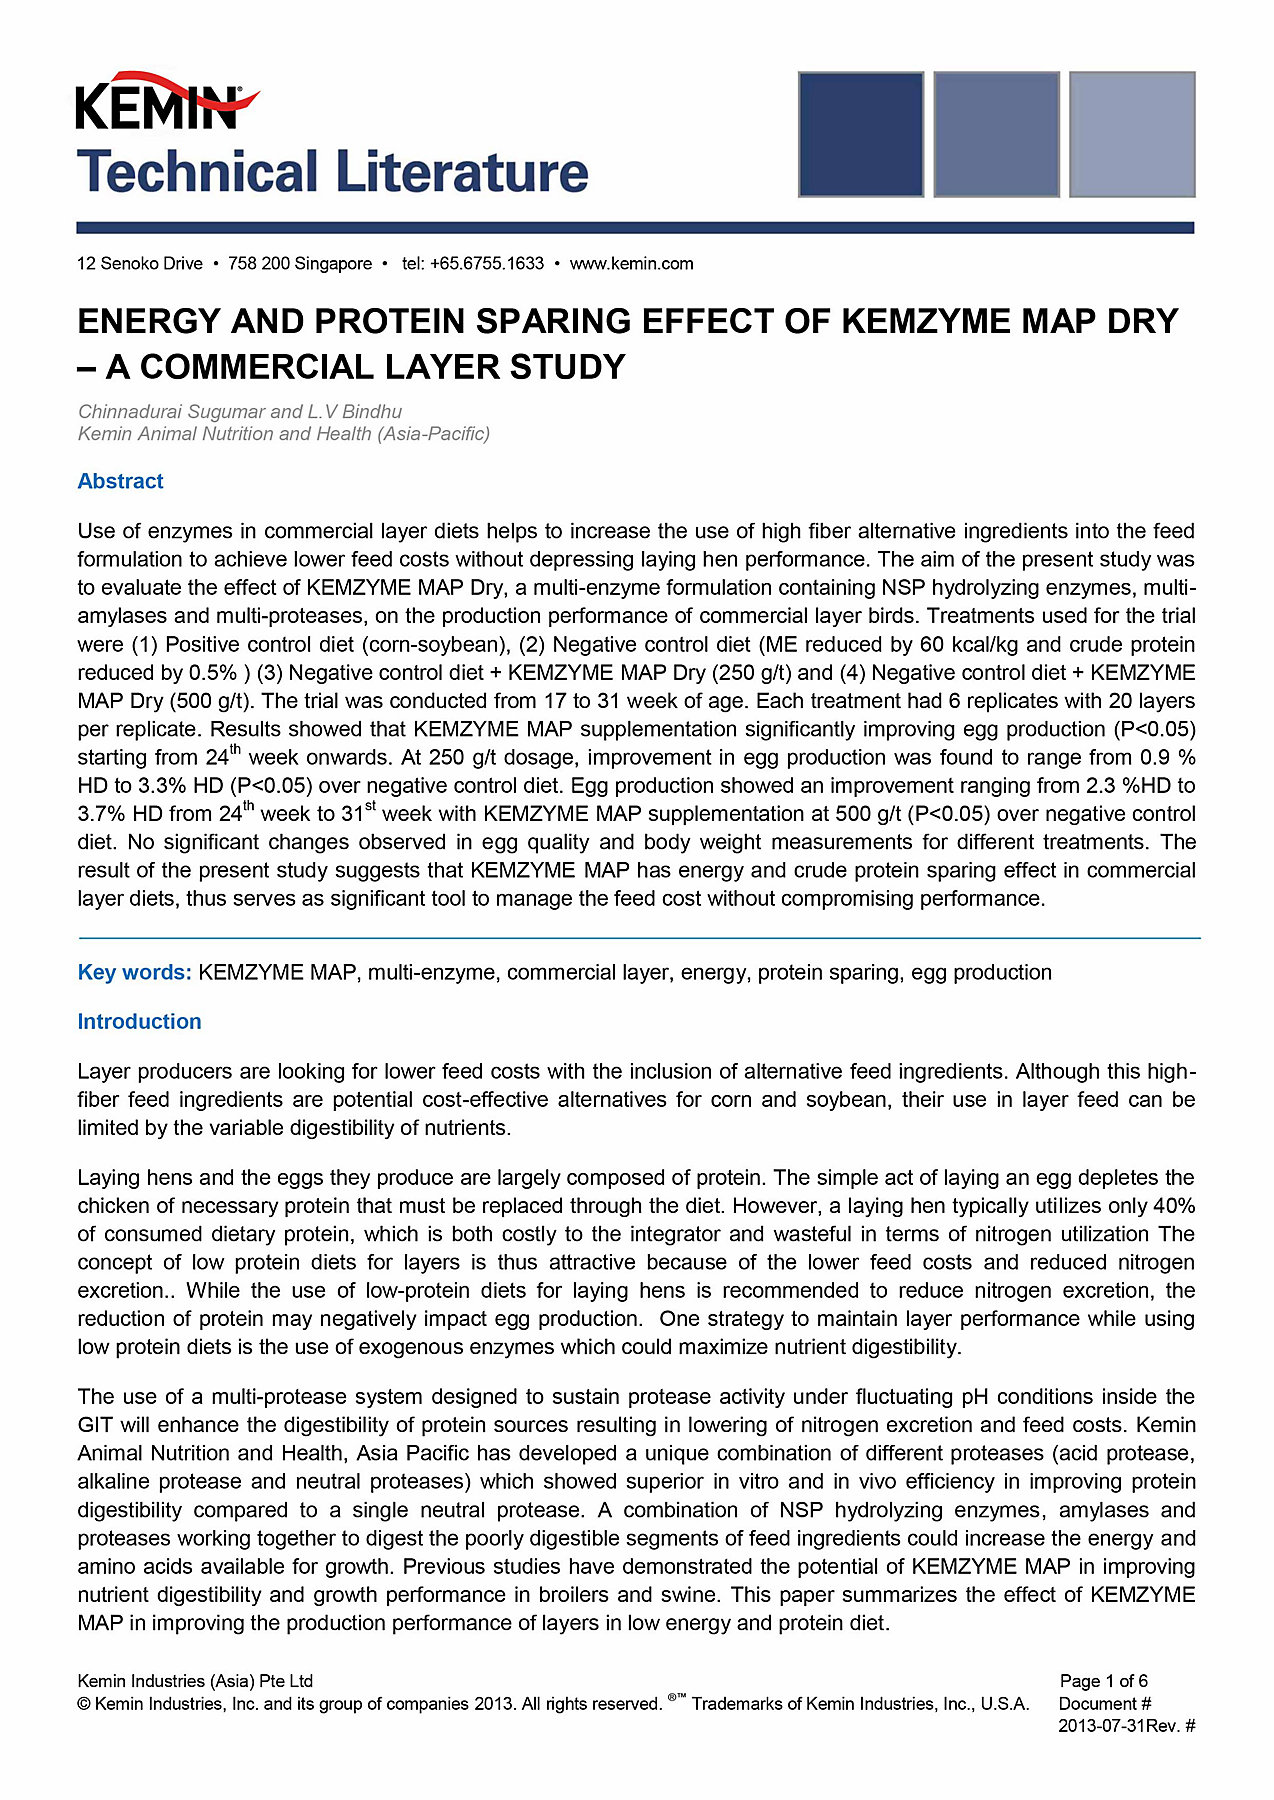 16_July_tl-13-00044_energy_and_protein_sparing_effect_of_kemzyme_map_dry_aeu_a_commercial_layer_st-01